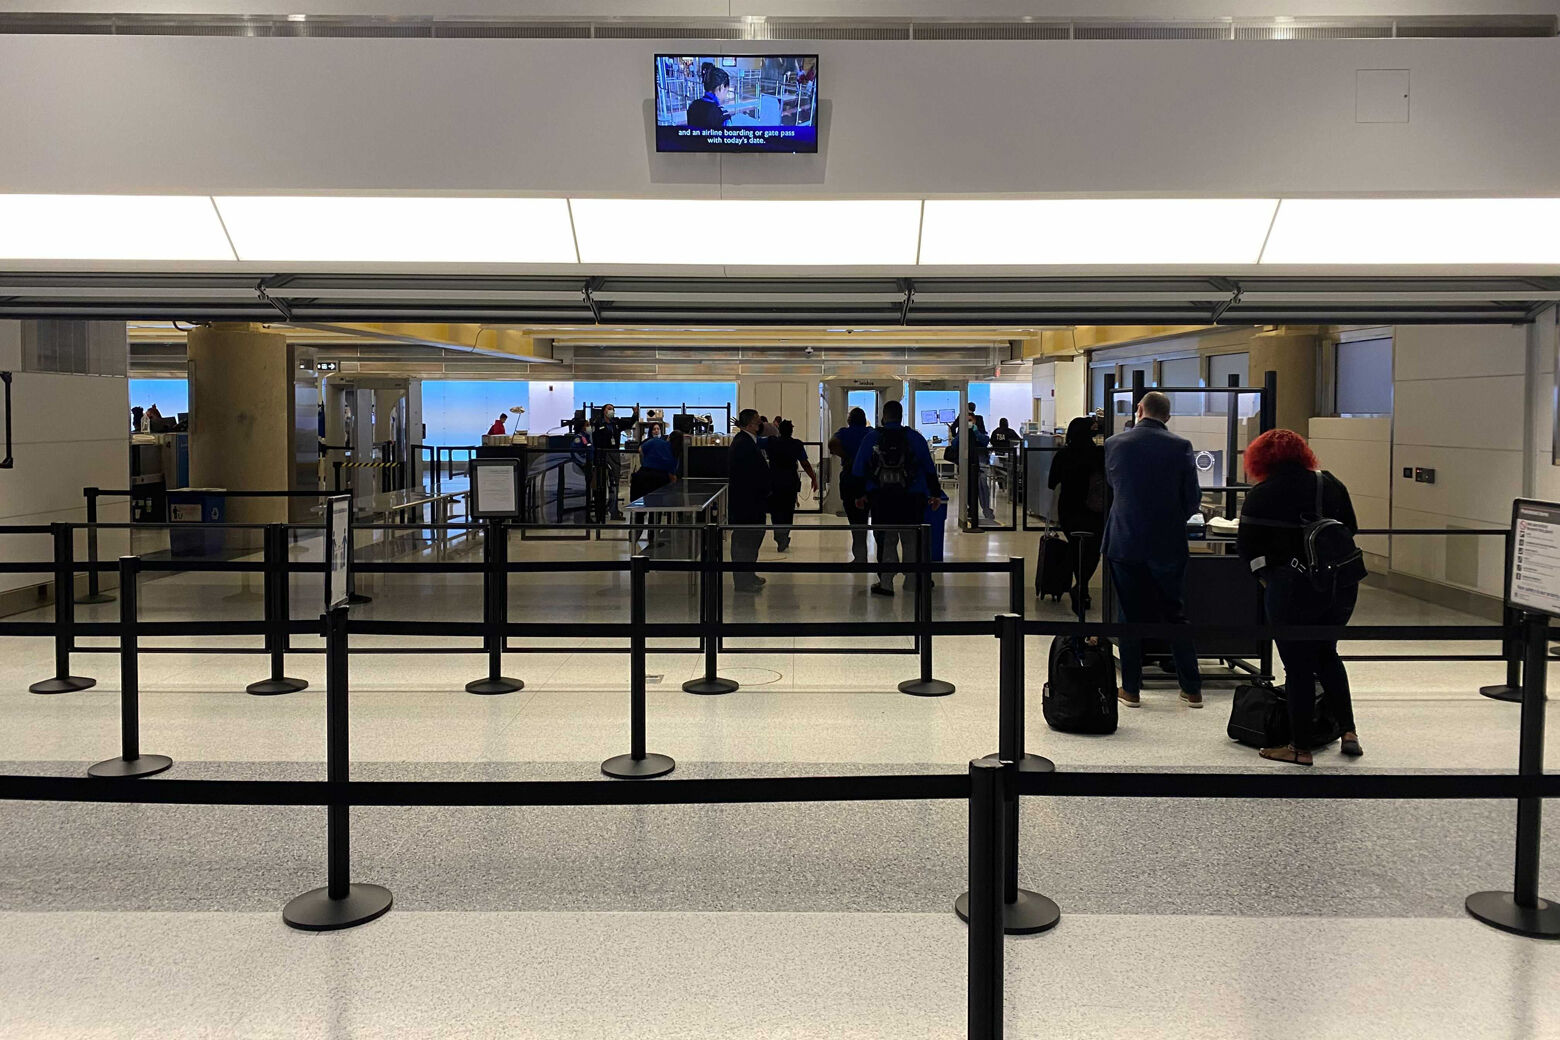 The flow through security lines at Reagan National Airport has changed, as of Nov. 9, 2021. (WTOP/John Domen)